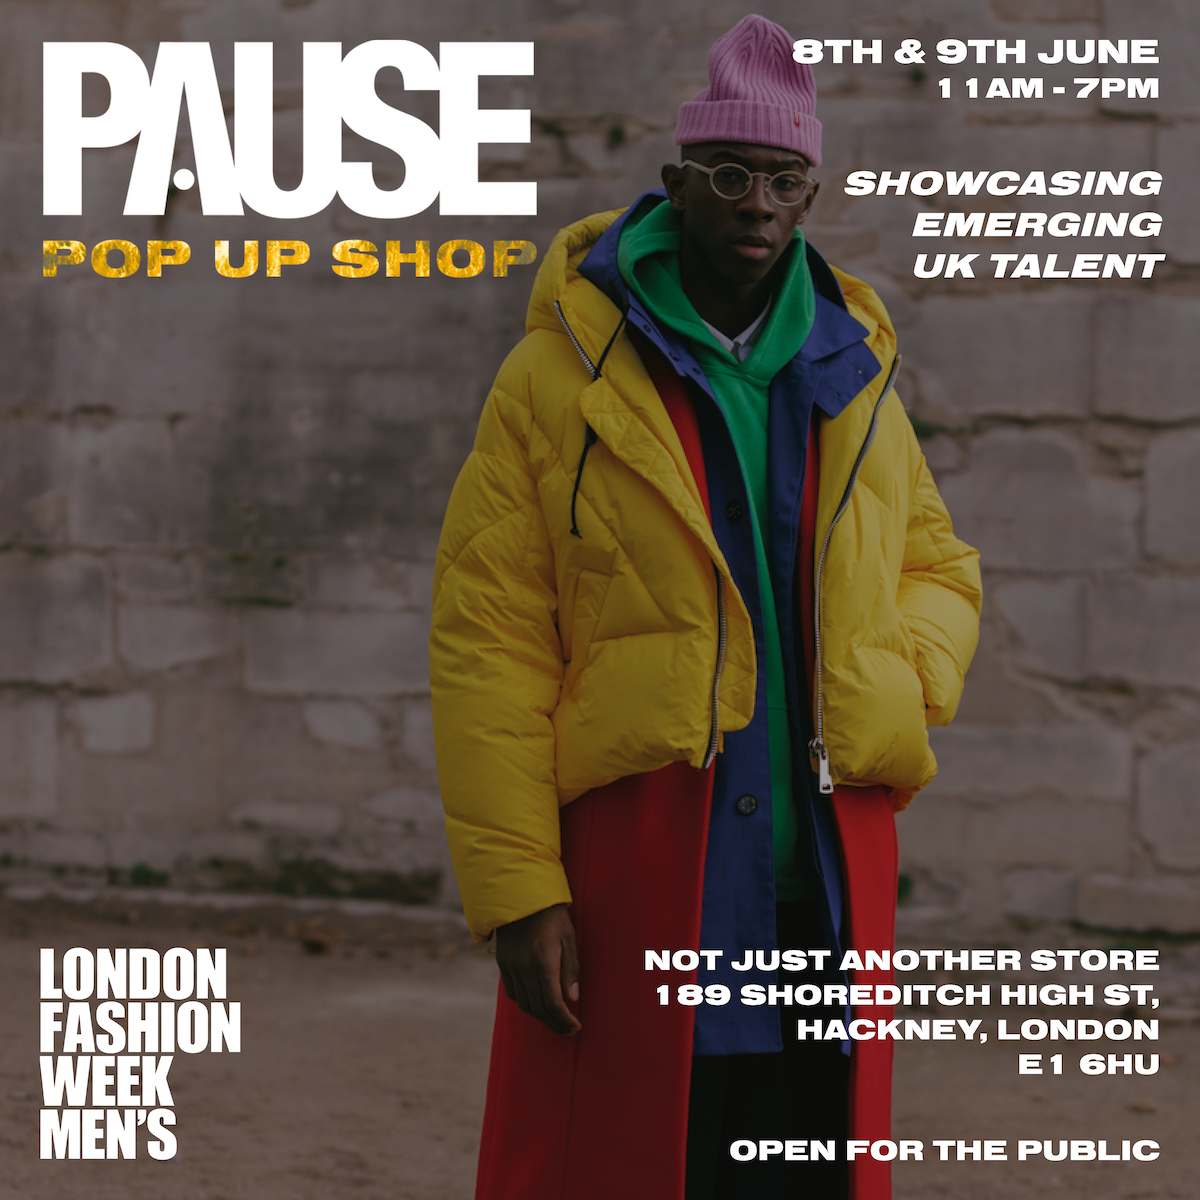 Check out the Full PAUSE LFWM Pop-Up Store Brand Lineup